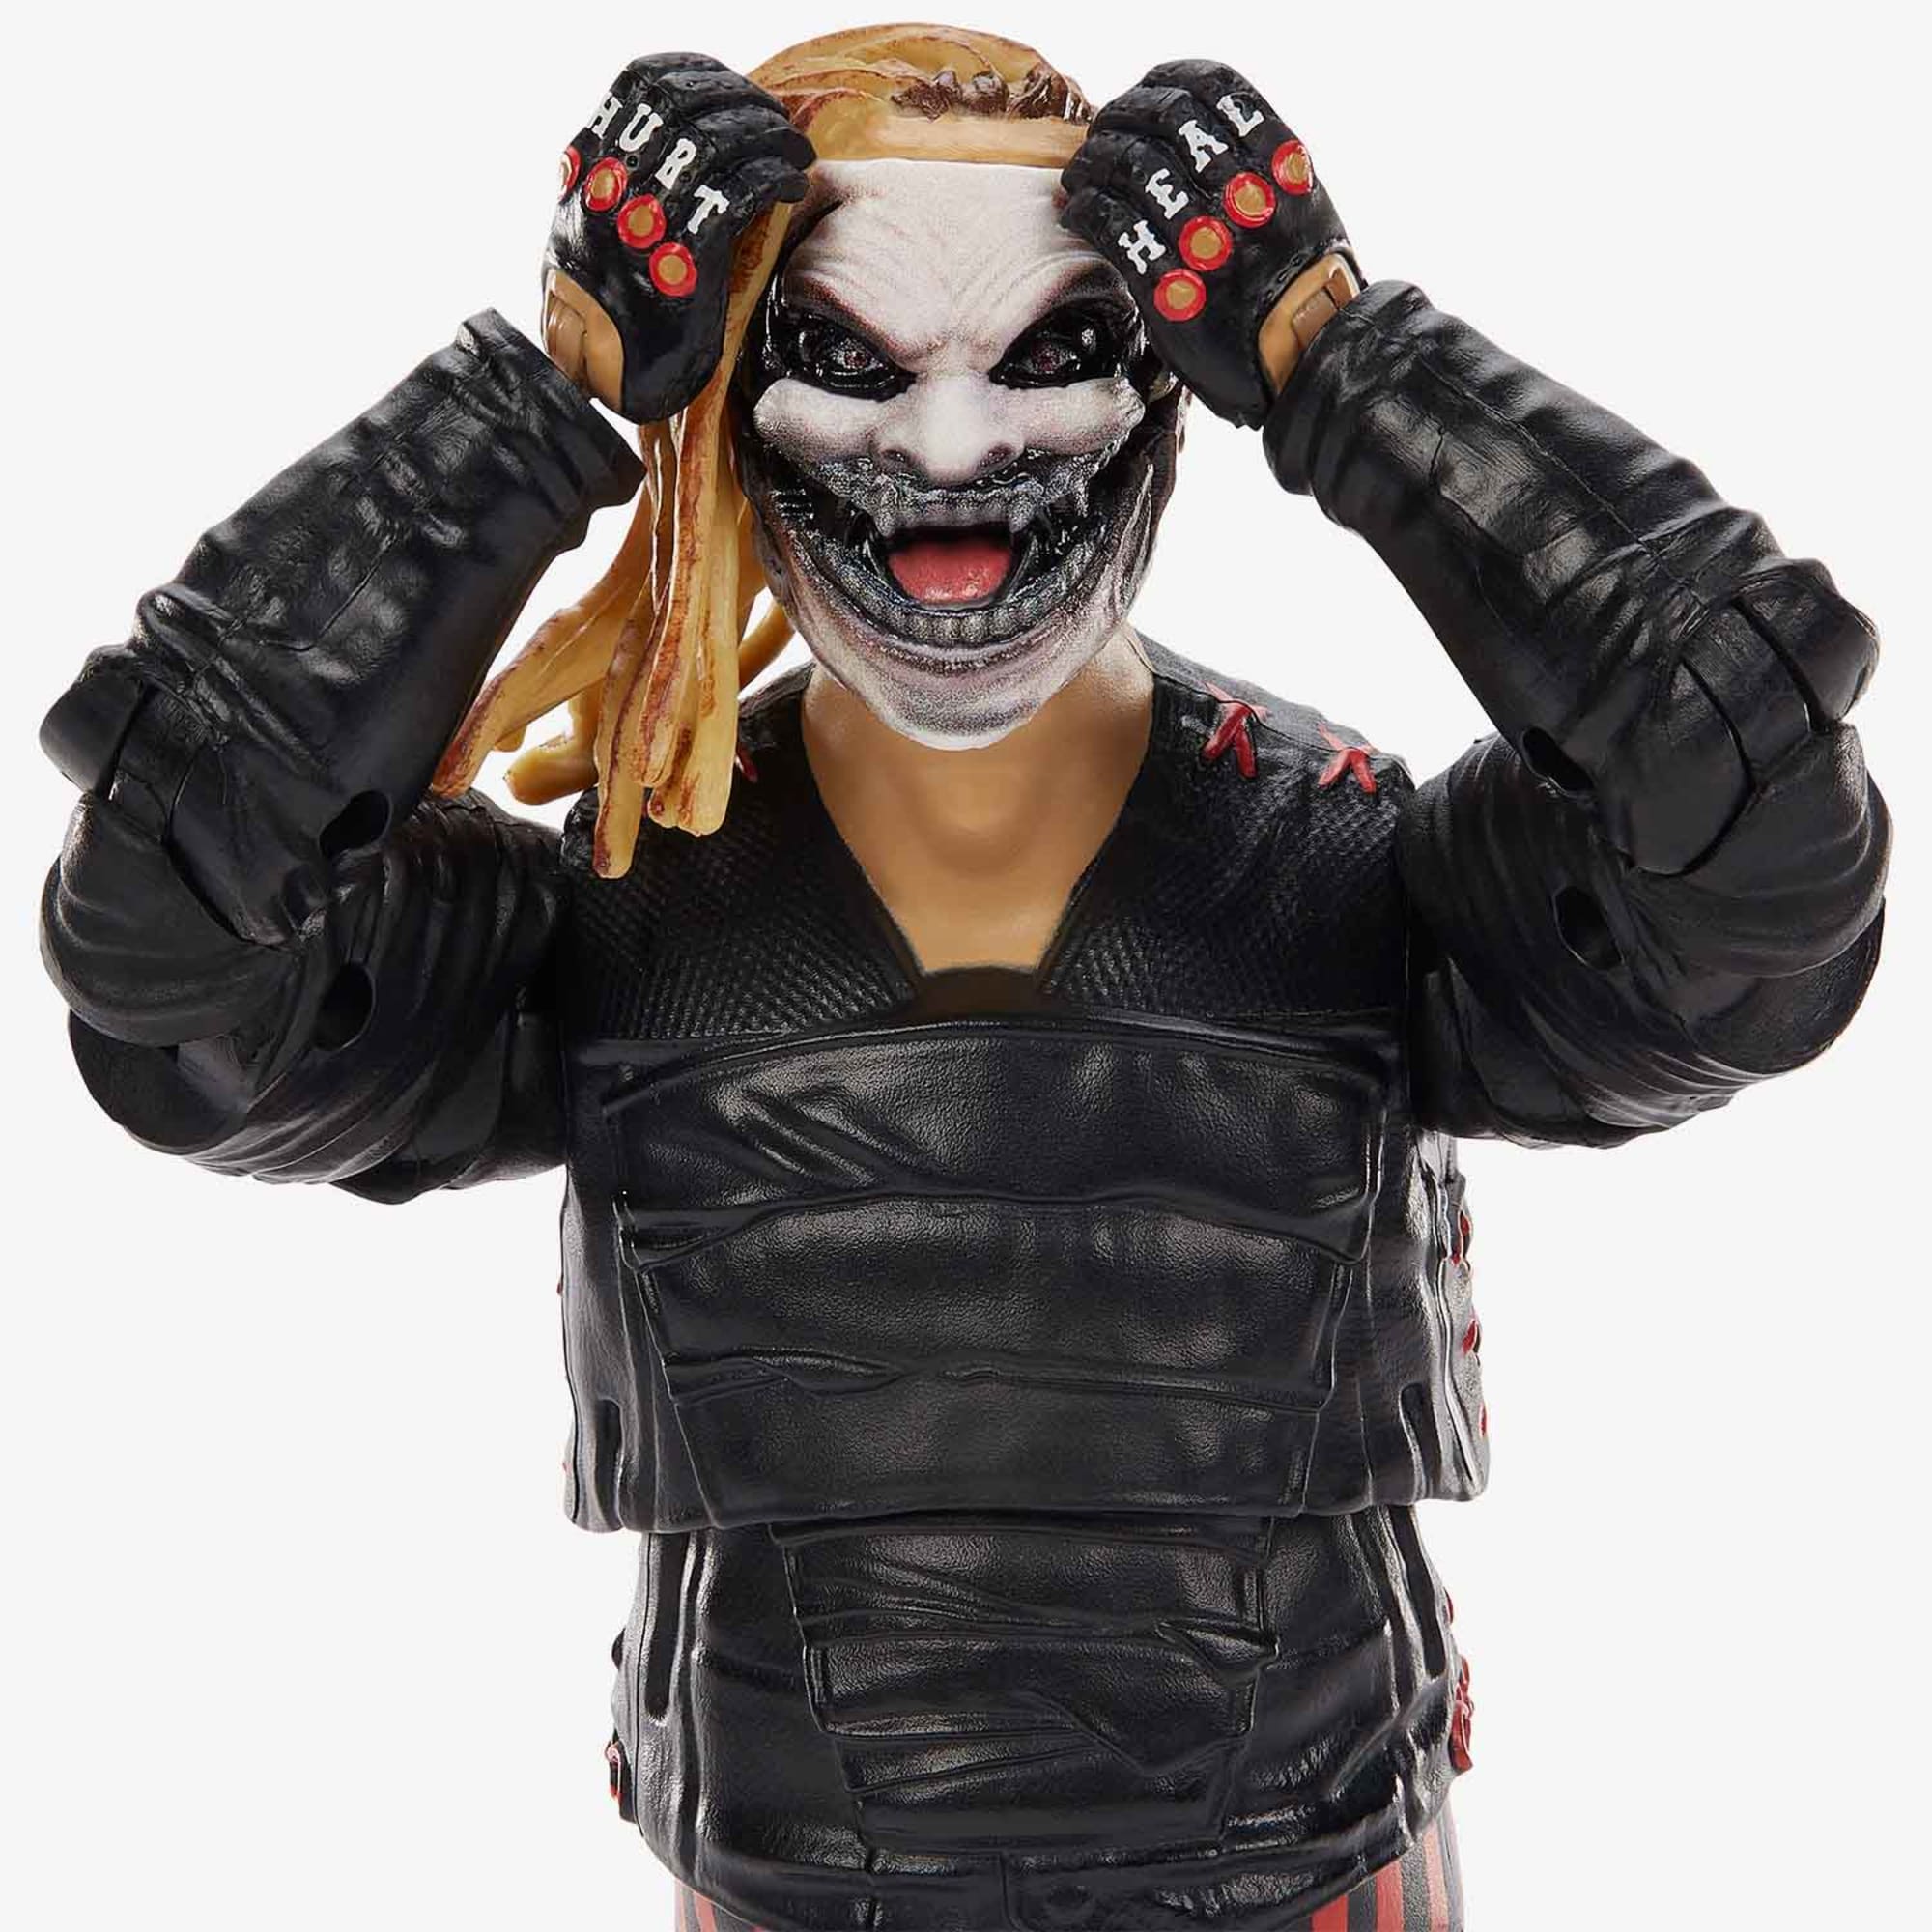 WWE® The Fiend Bray Wyatt™ Ultimate Edition Action Figure